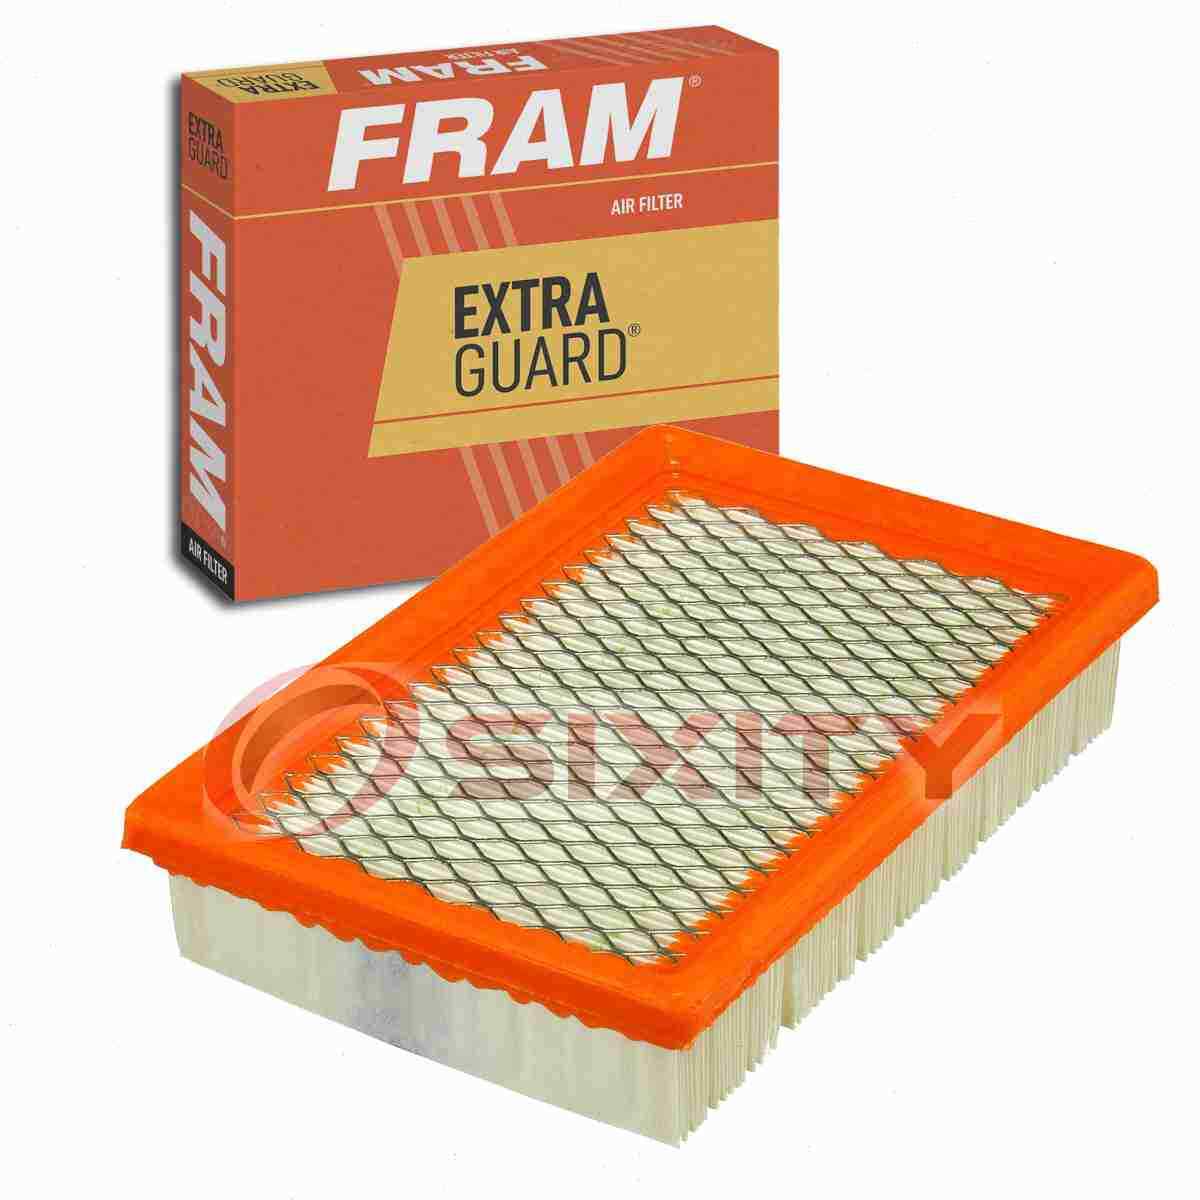 FRAM Extra Guard Air Filter for 1982-1984 Dodge Rampage Intake Inlet hb